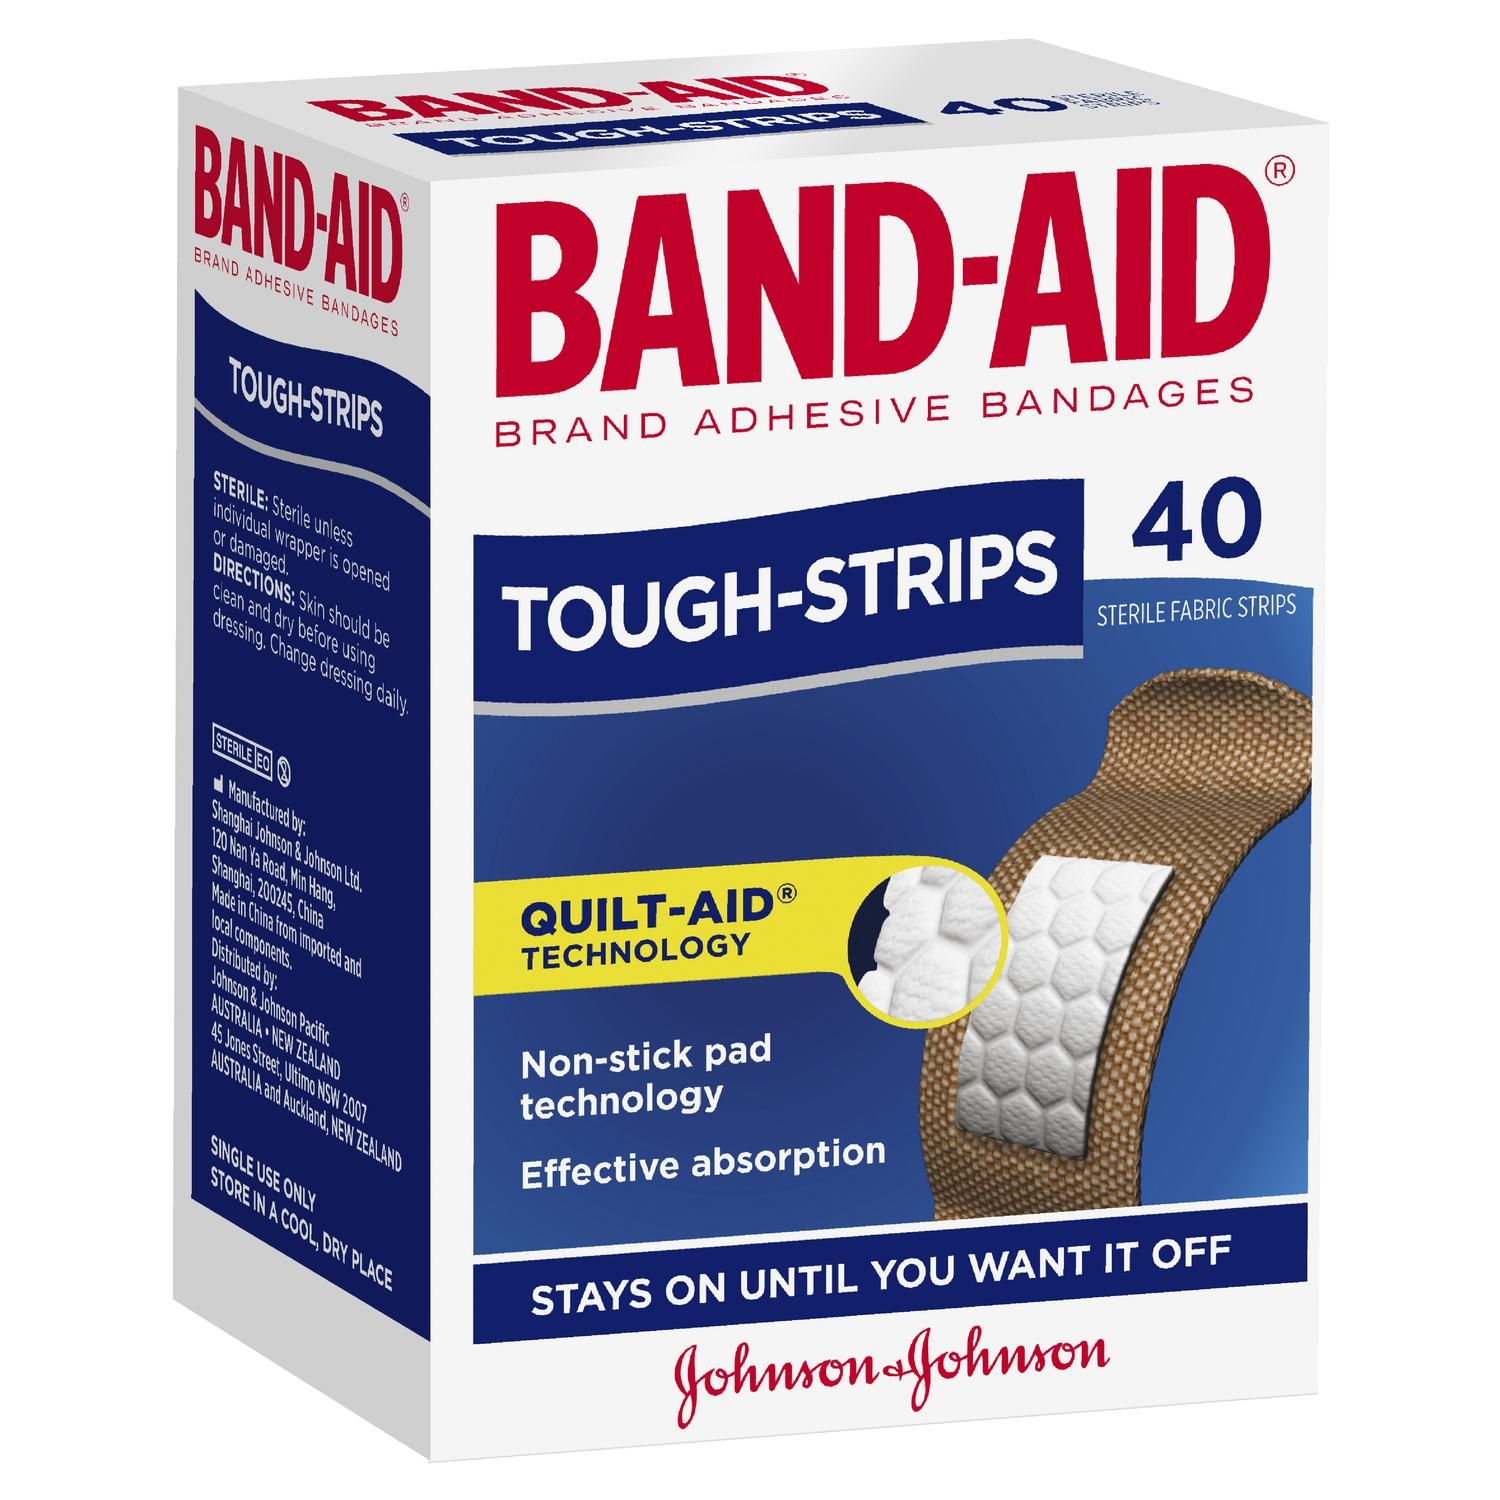 BAND-AID TOUGH STRIPS REGULAR 40PK - Direct Chemist Outlet